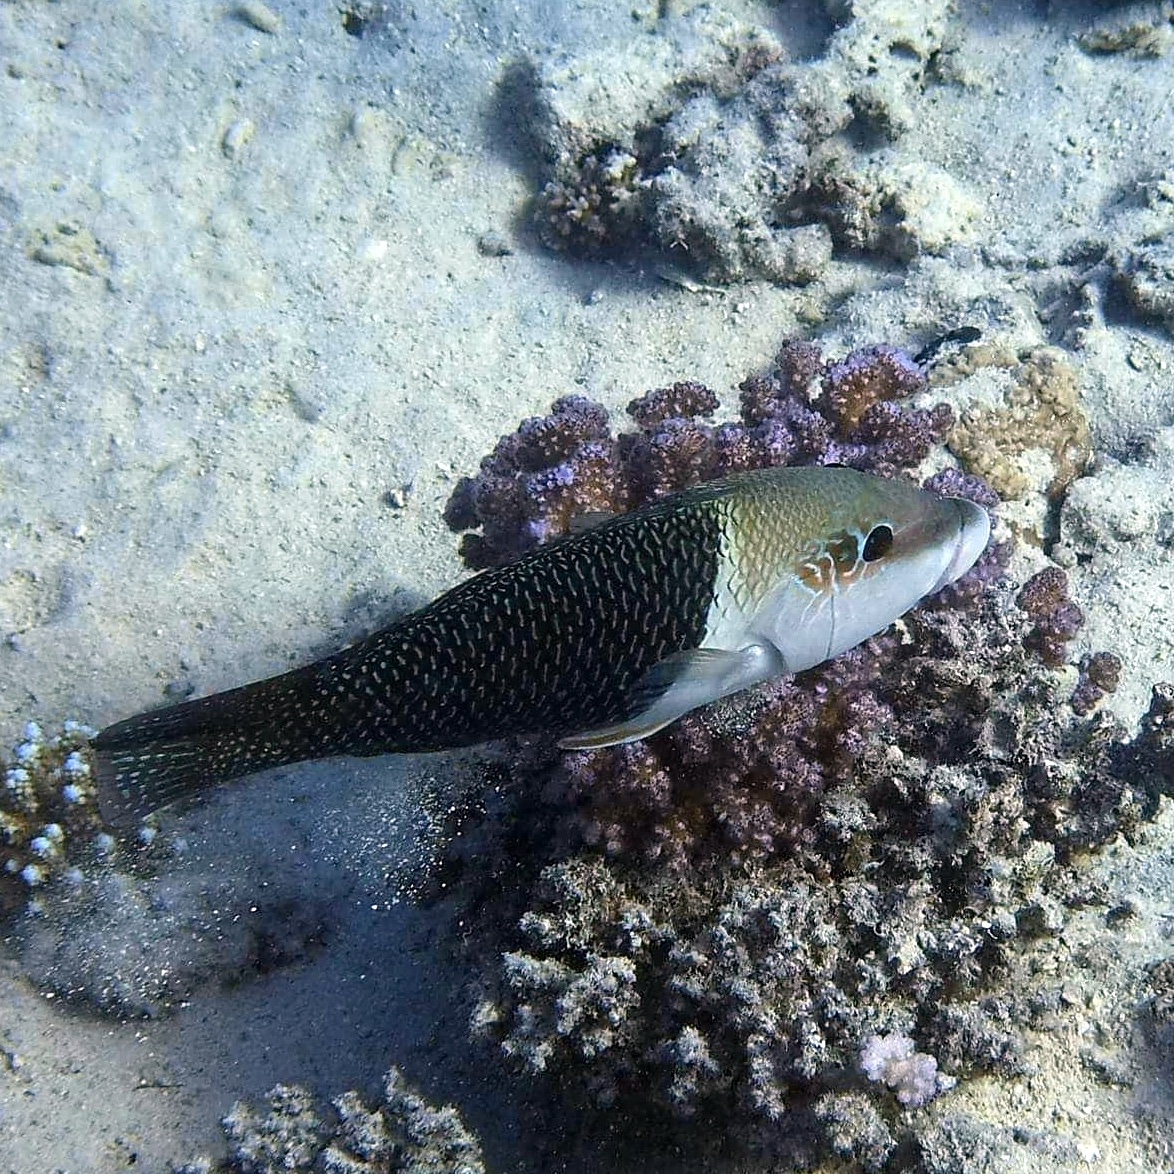 The Blackeye Thicklip wrasse. A little beauty